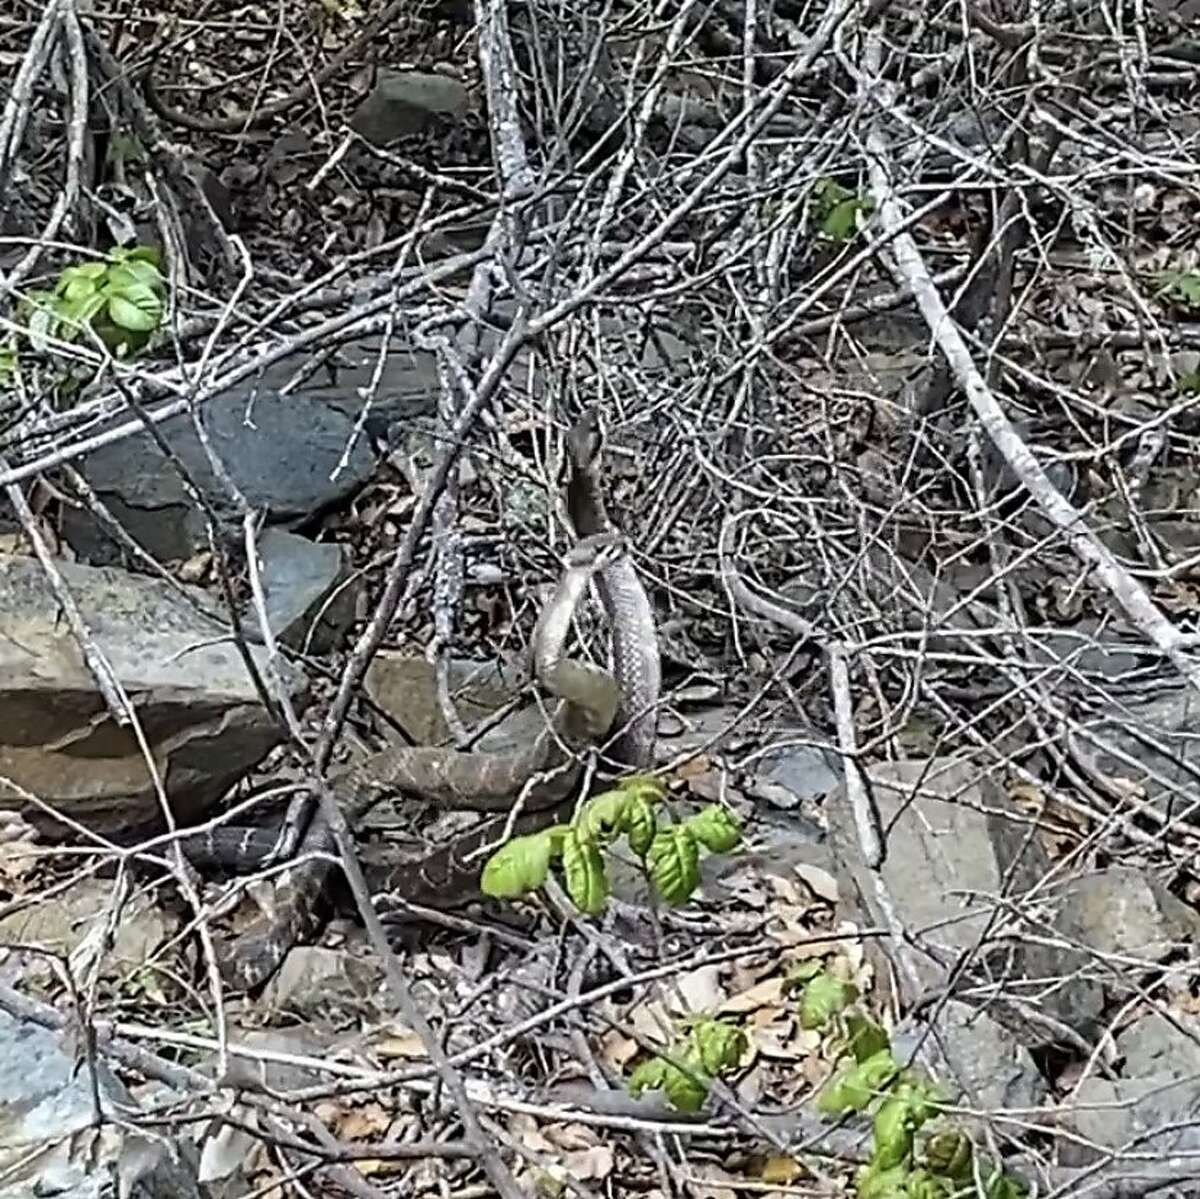 Two snakes spotted on a hike.